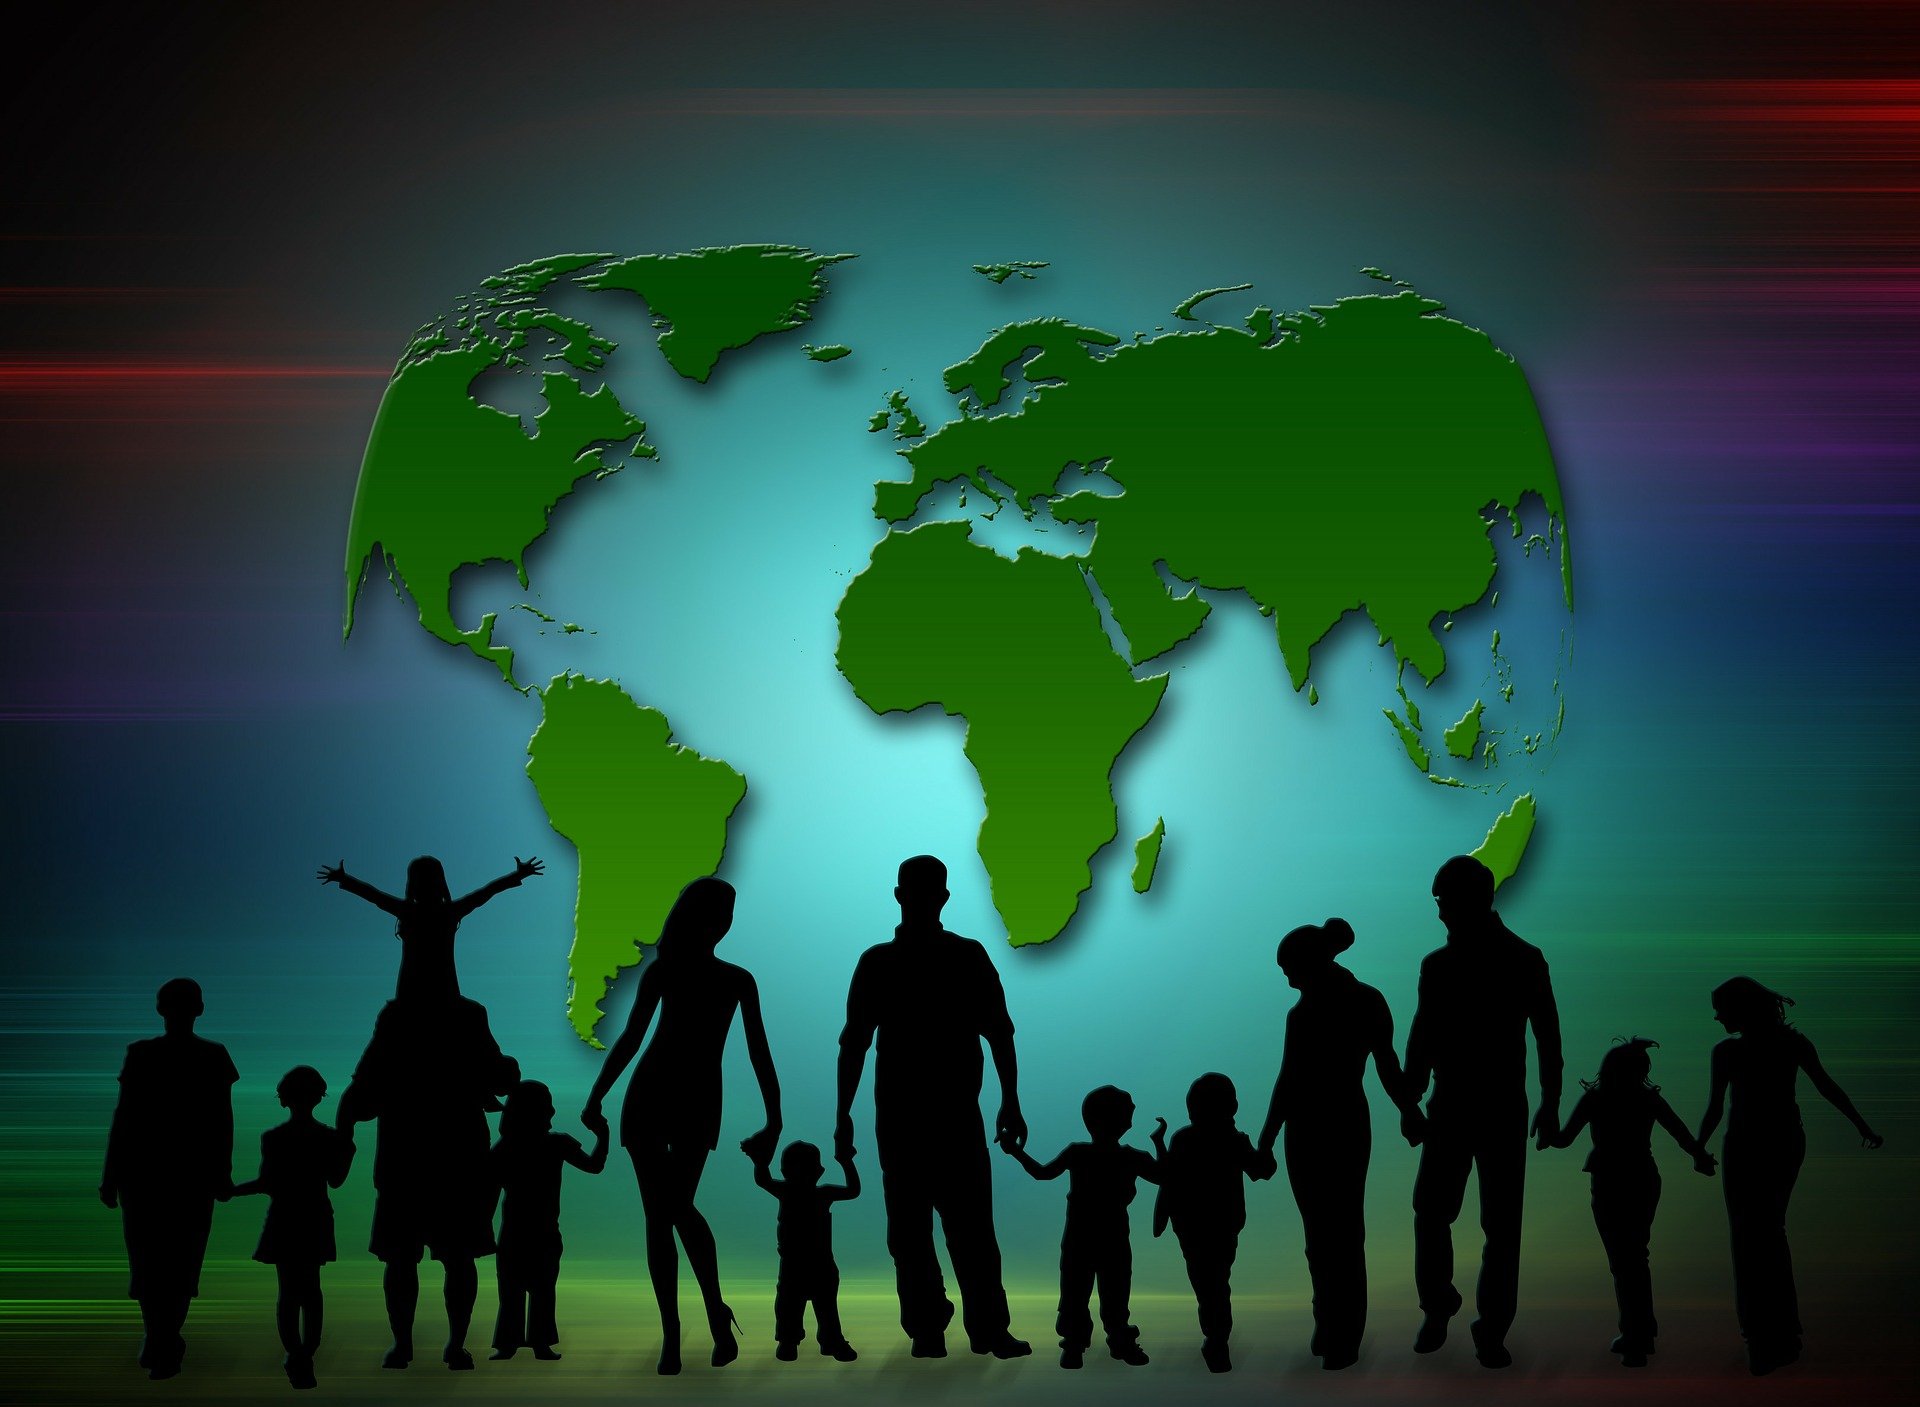 Illustration of parents and children coming together worldwide. | Source: Pixabay.